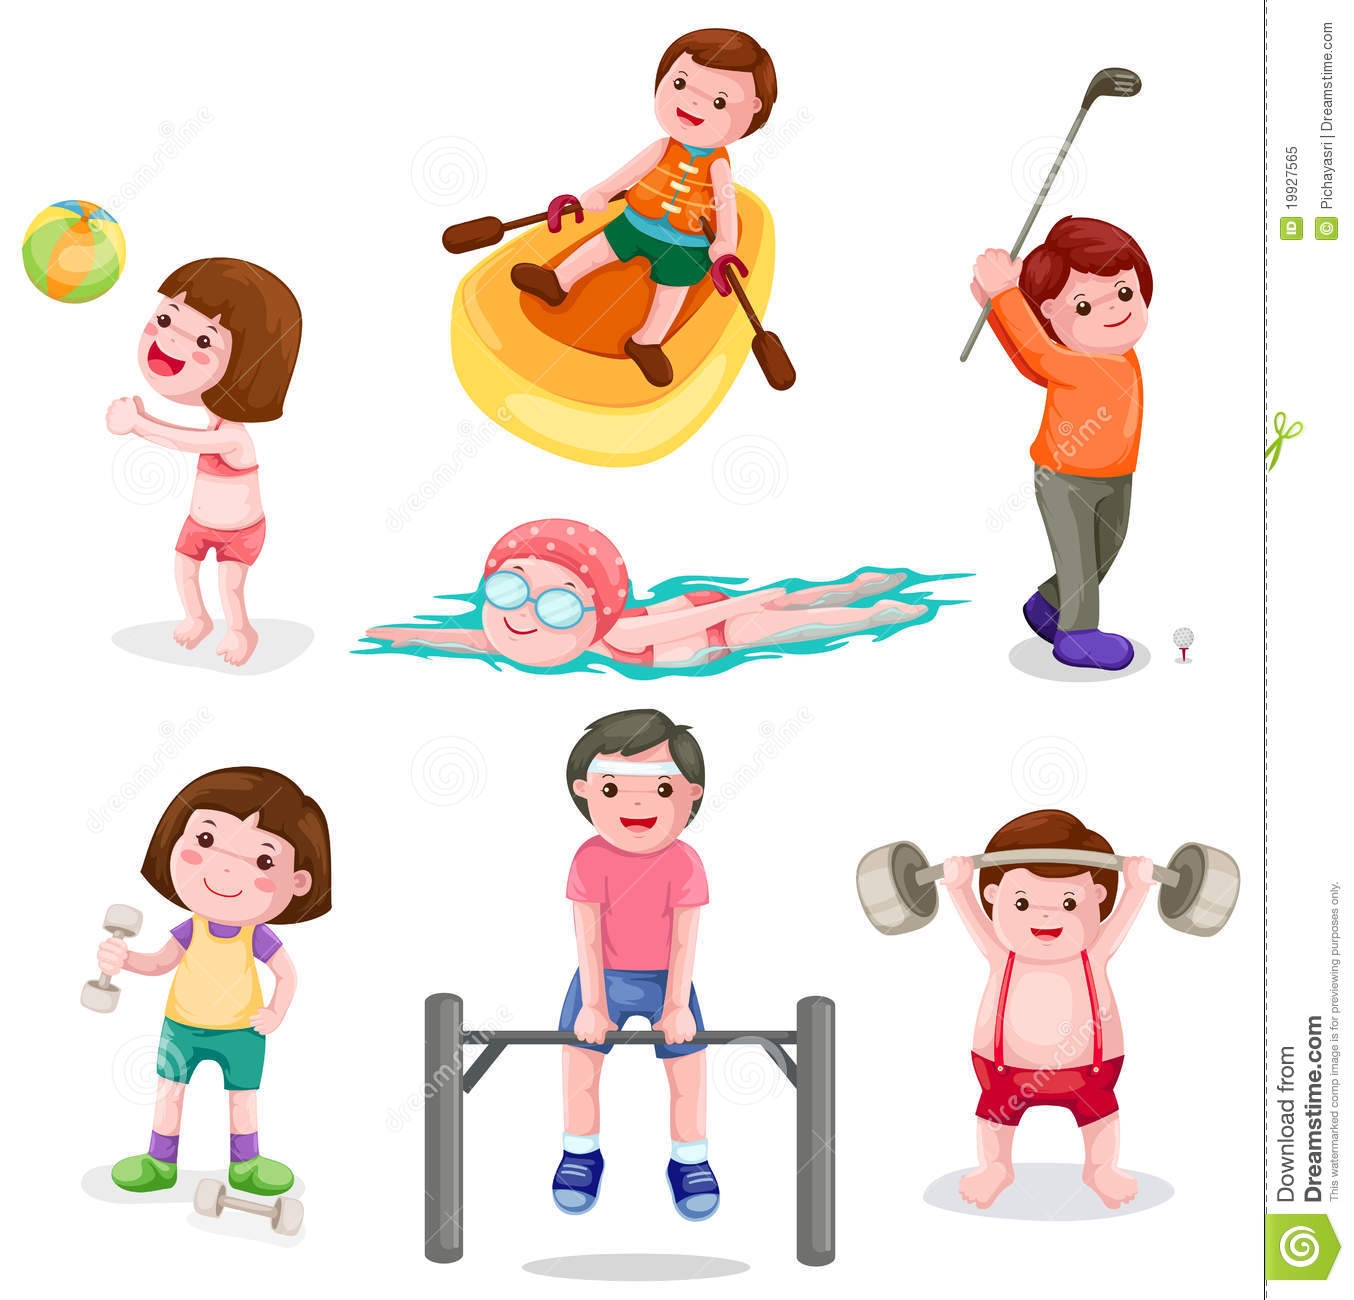 physical-activity-clipart-10-free-cliparts-download-images-on